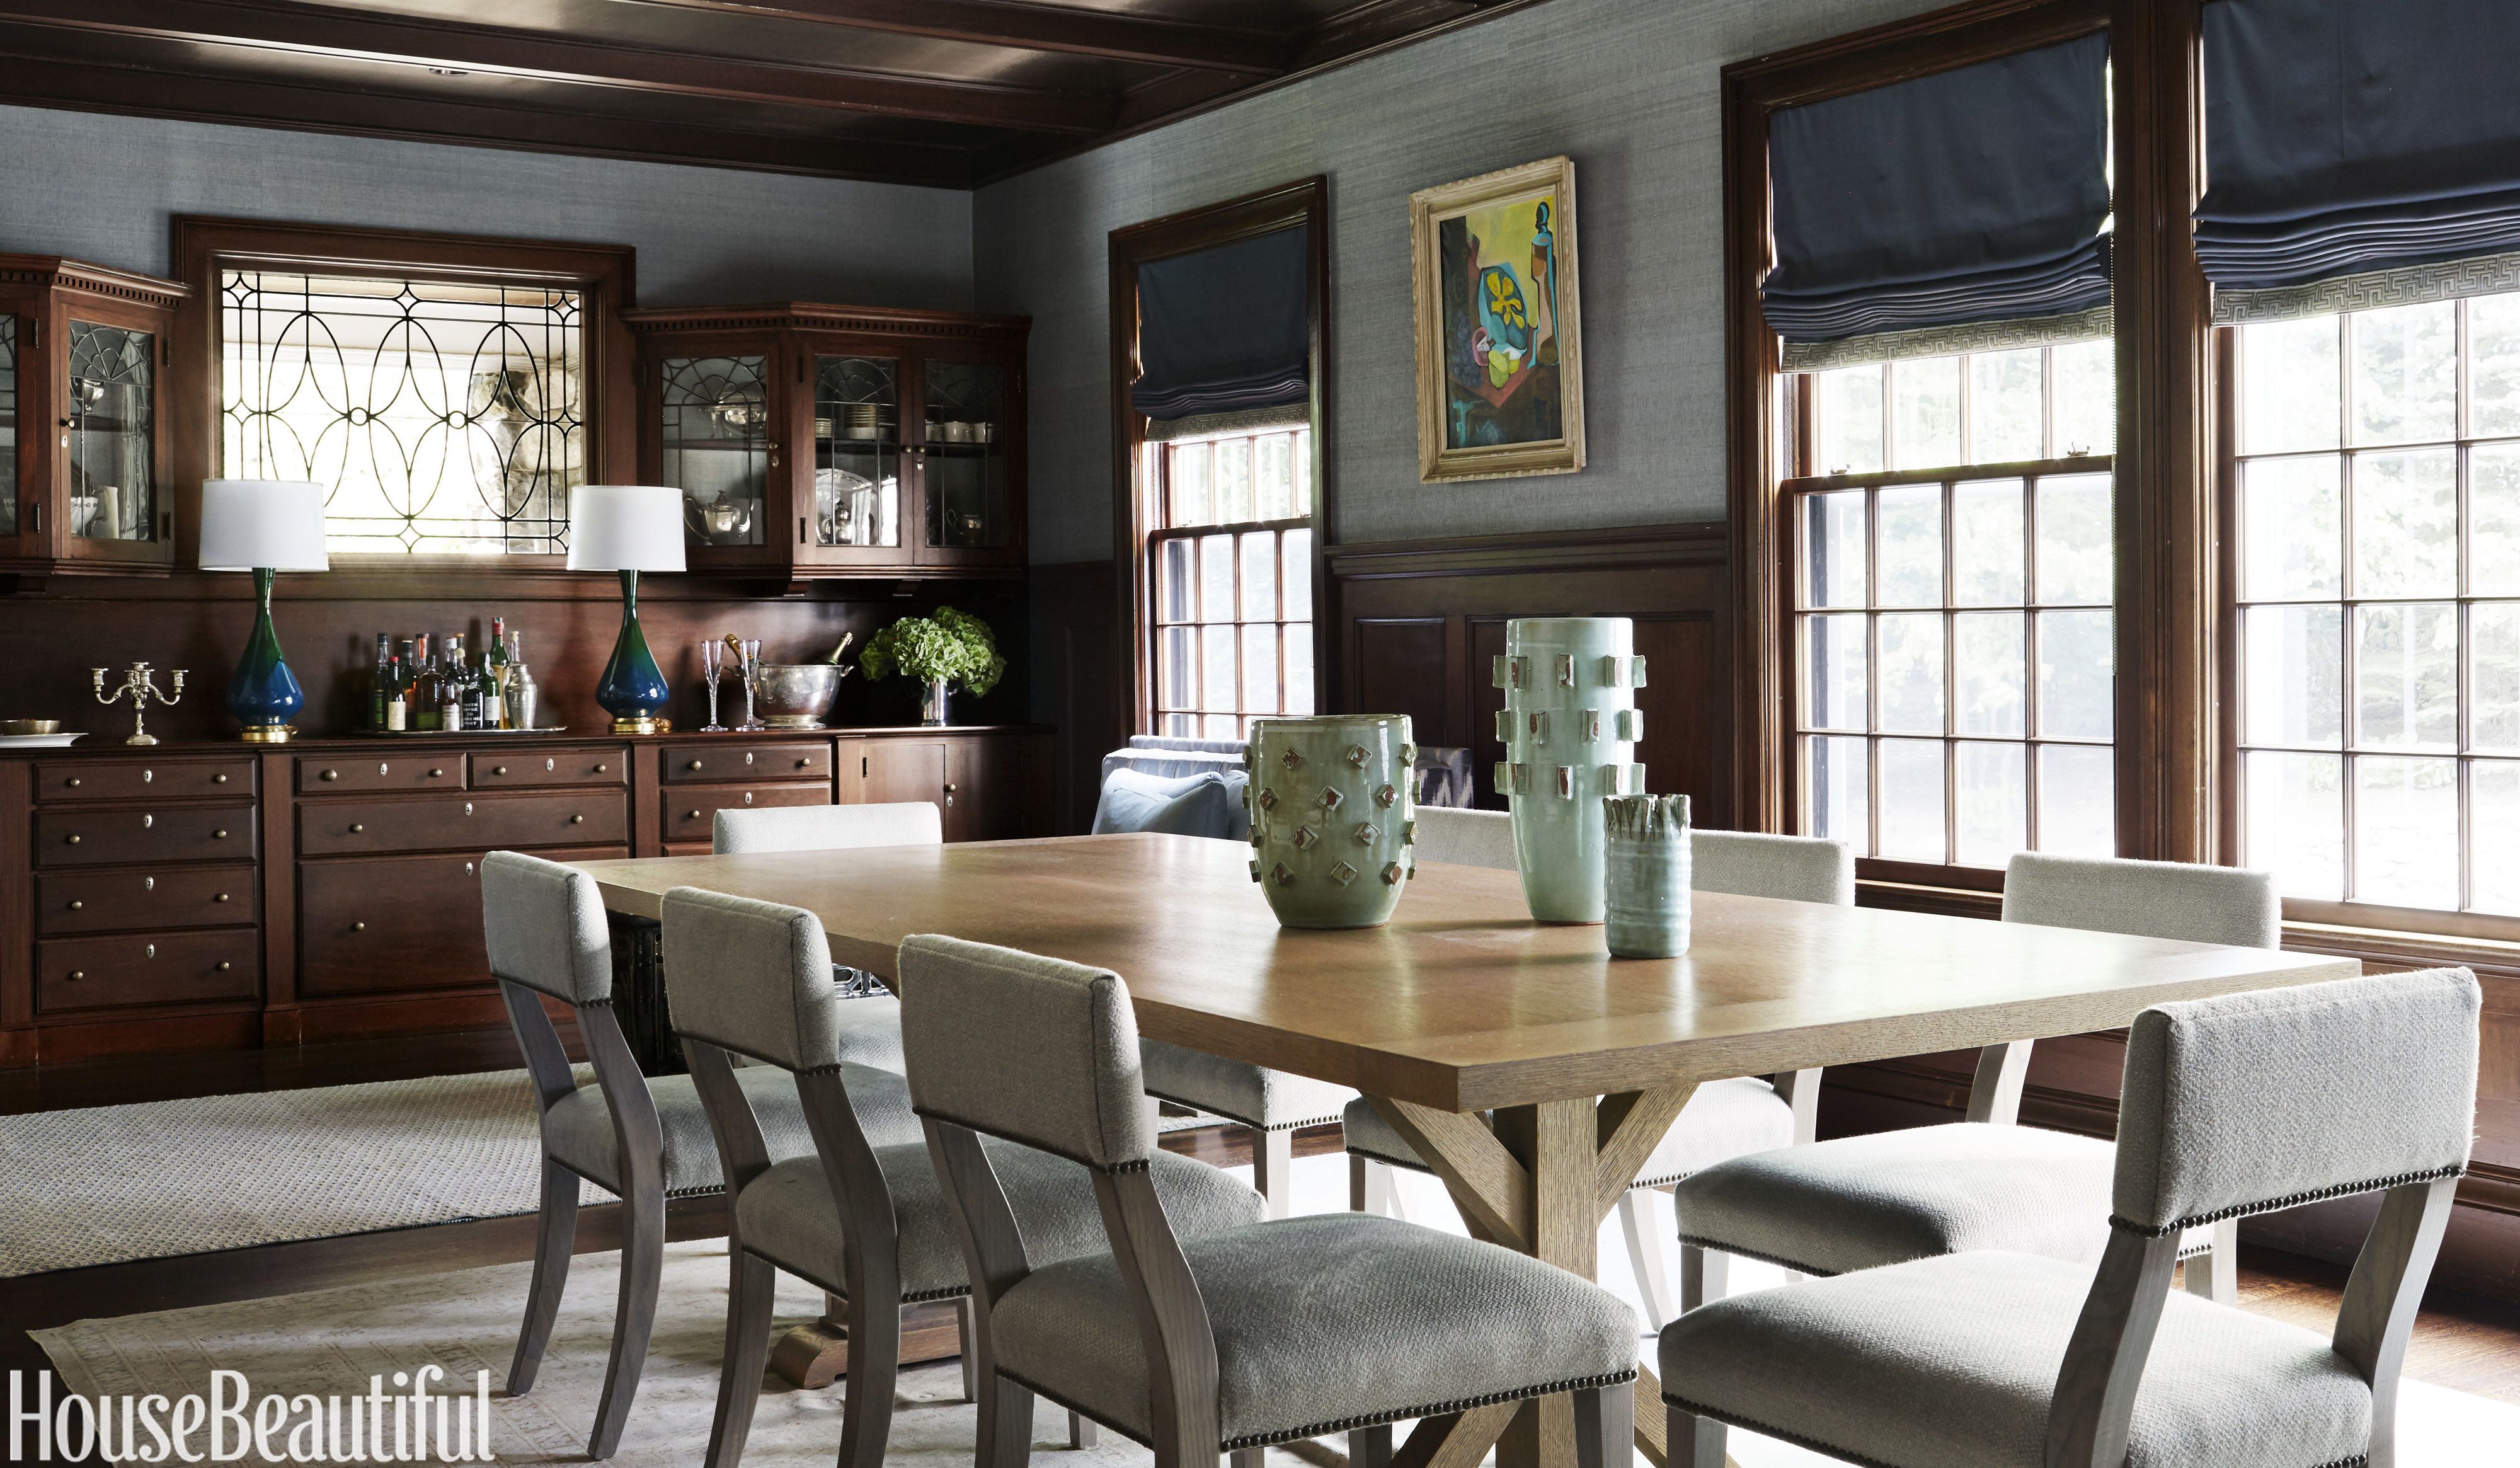 15 Rustic Dining Room Ideas Best, Small Rustic Dining Room